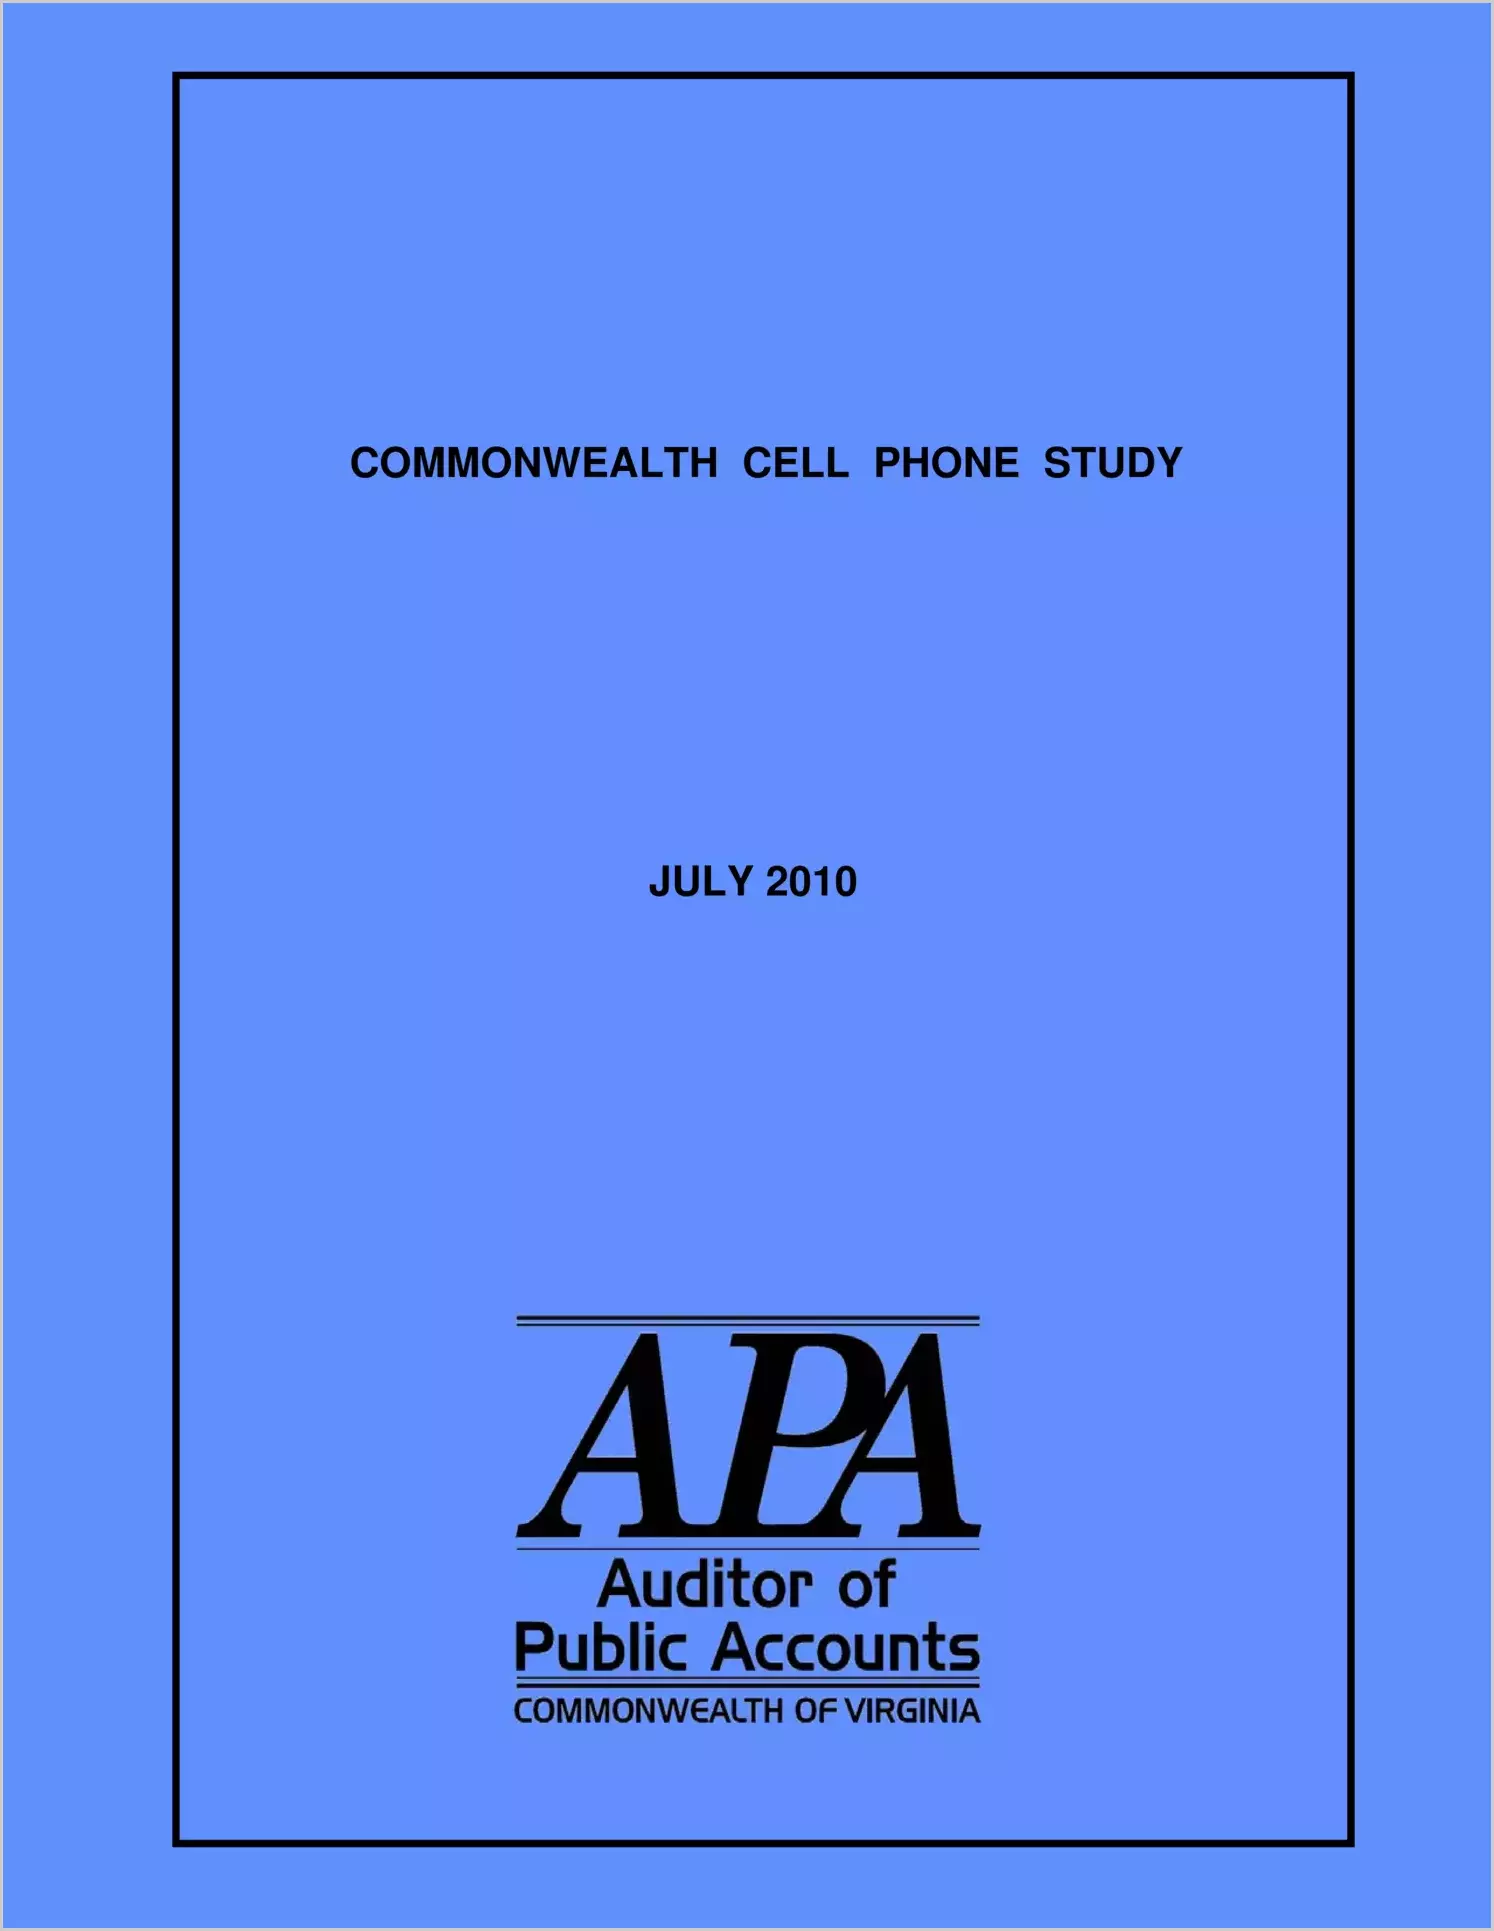 Commonwealth Cell Phone Study - July 2010